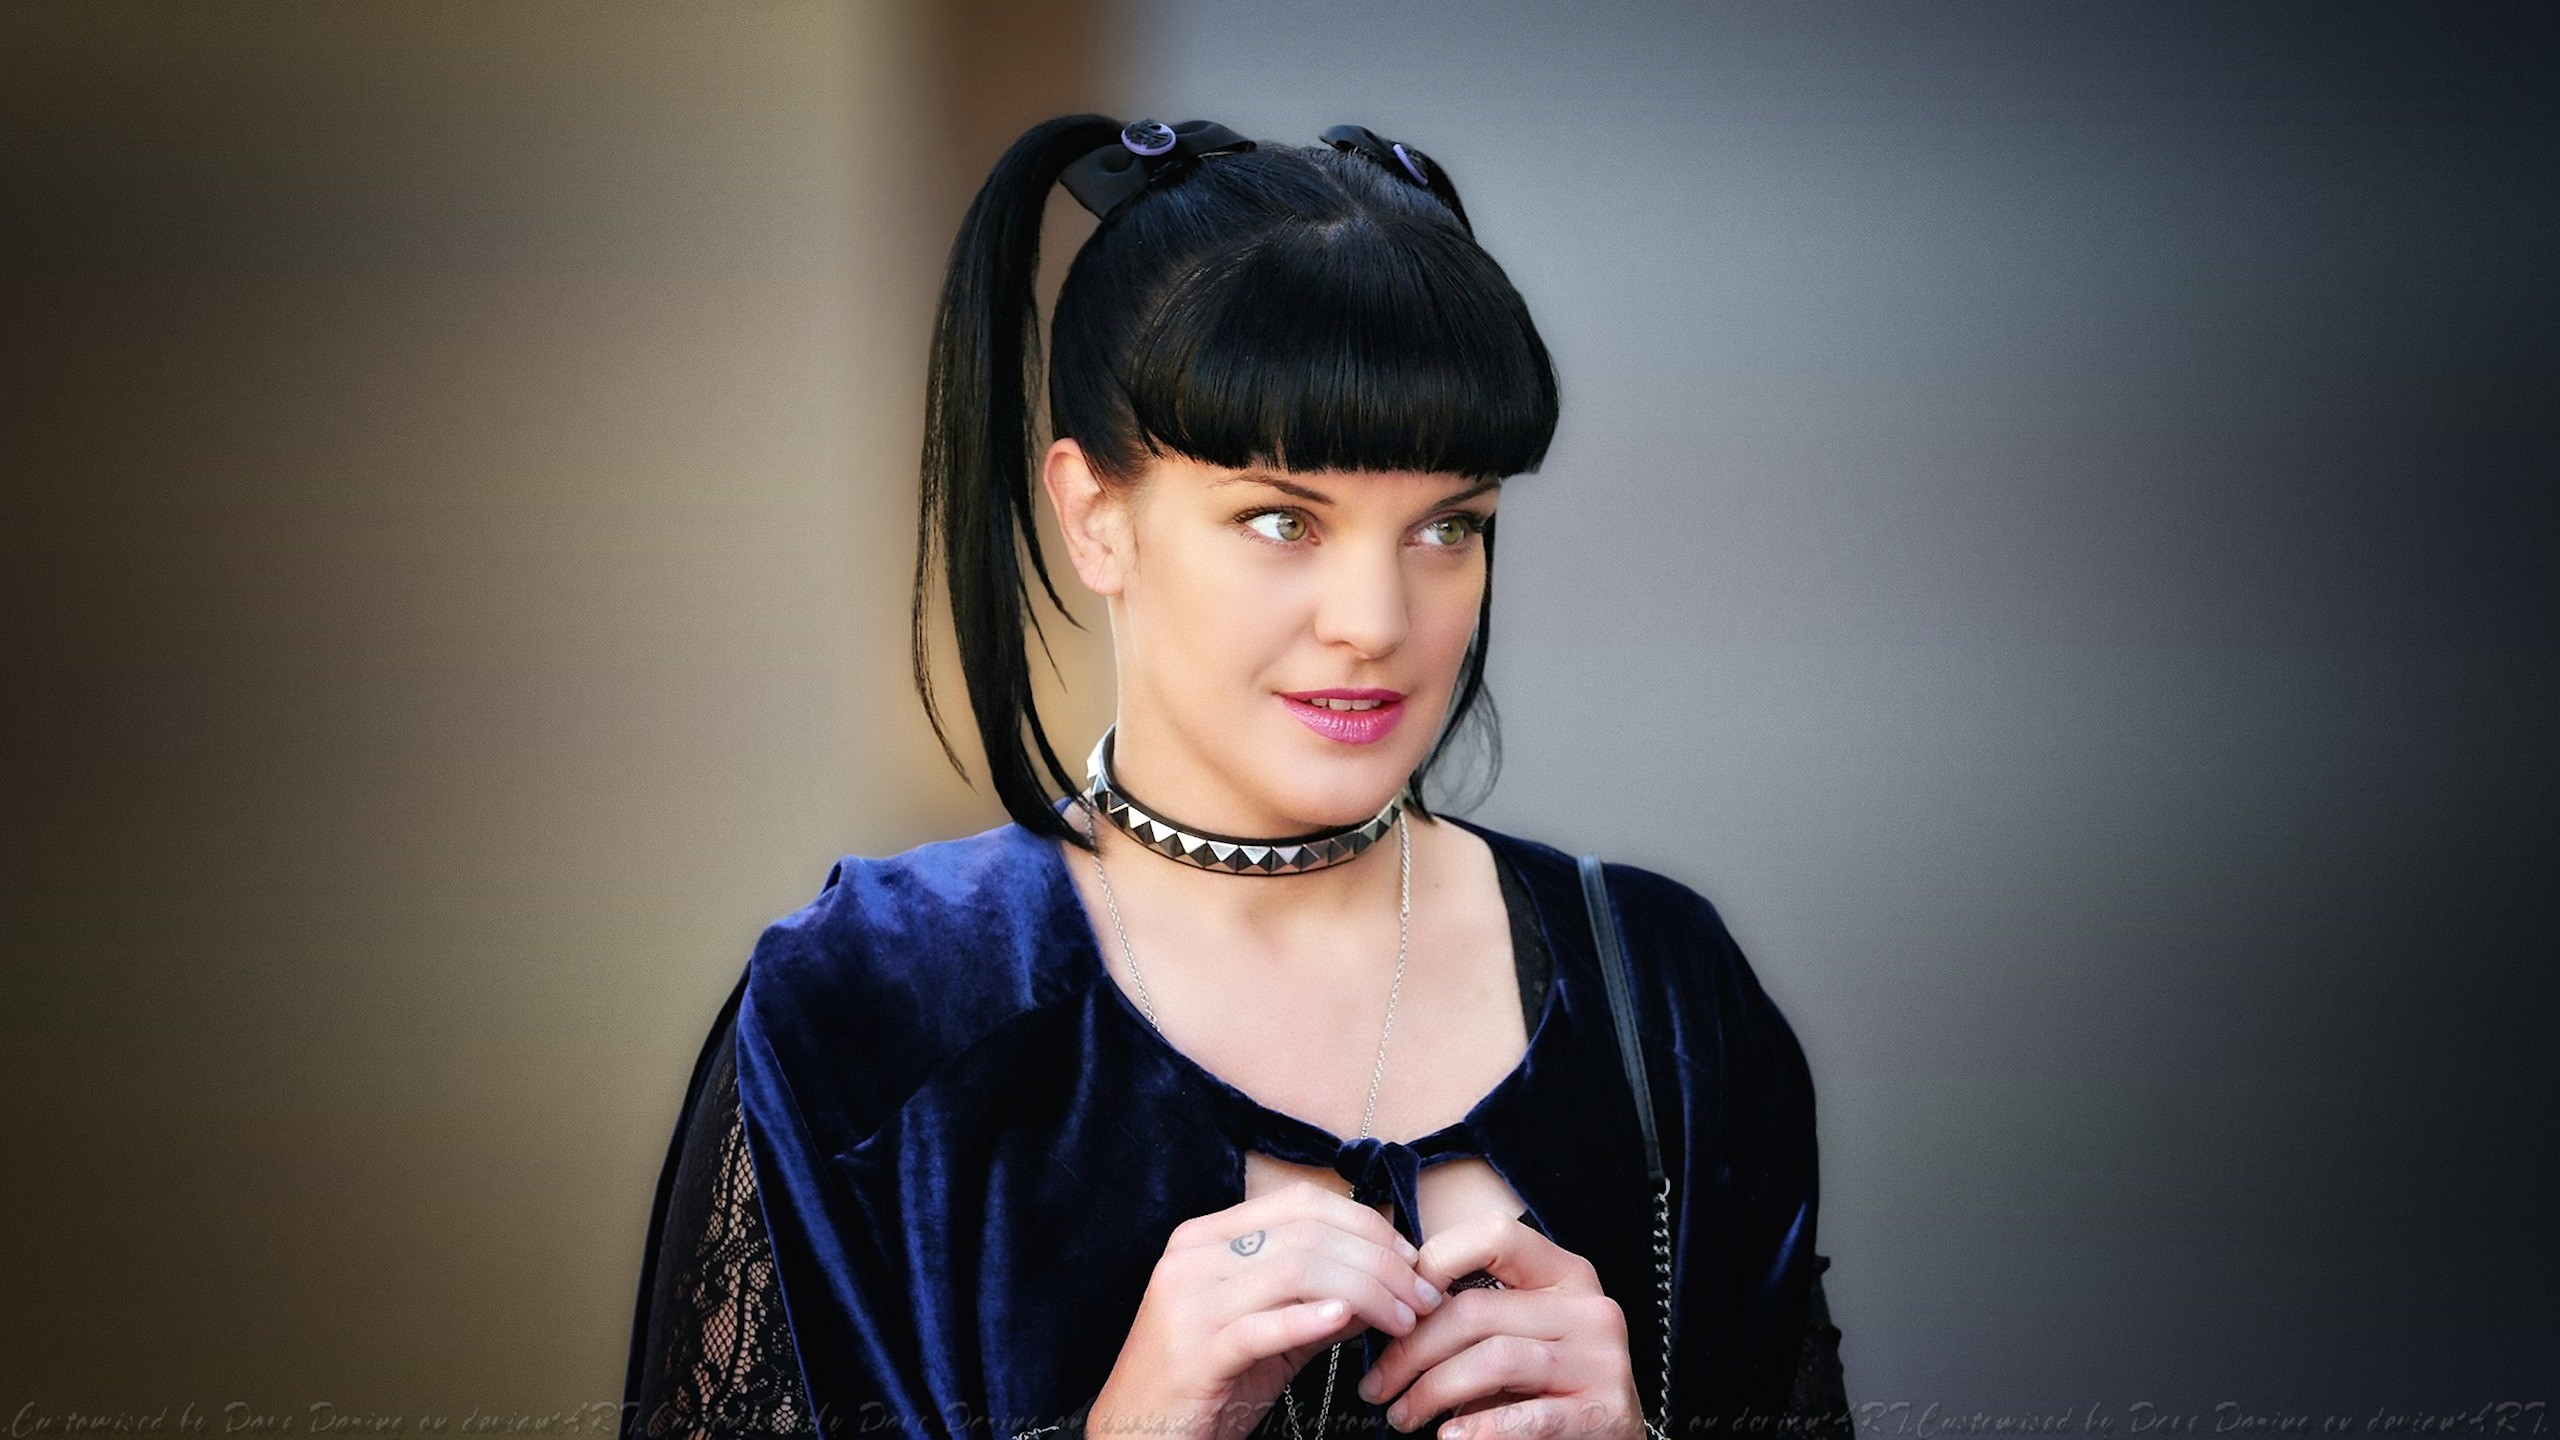 2560x1440 ... Pauley Perrette Sweet Abby by Dave-Daring